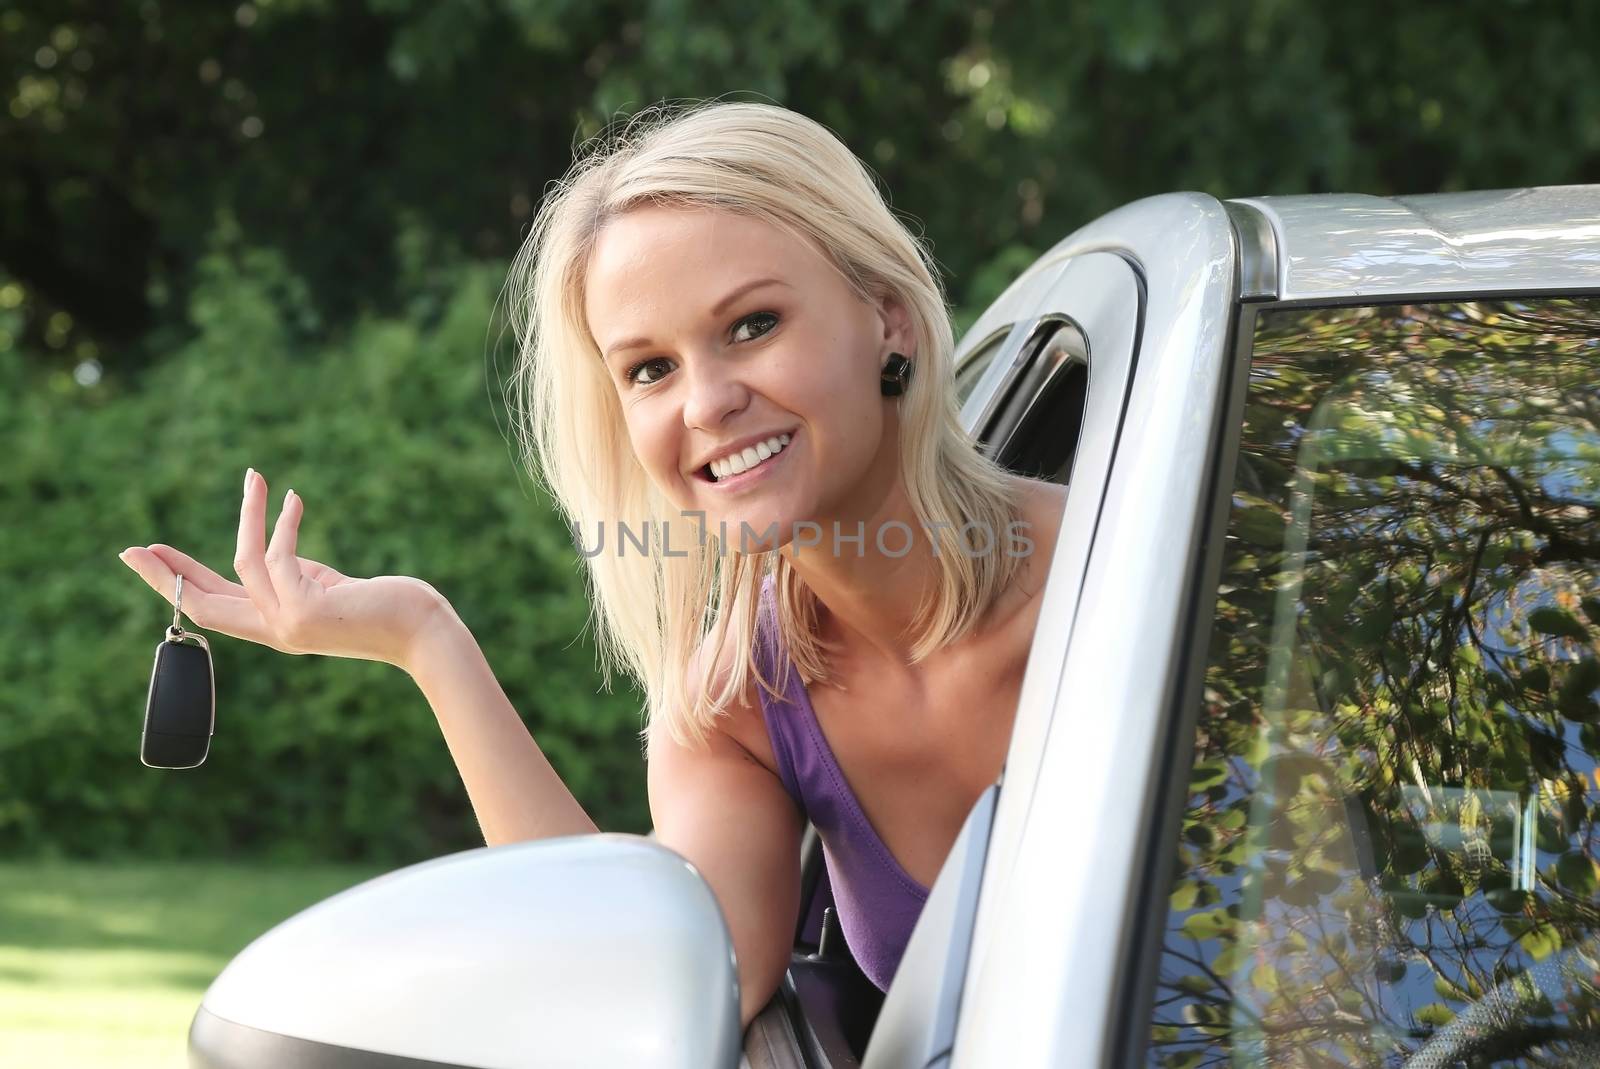 Lovely smiling young woman with the key to her new vehicle